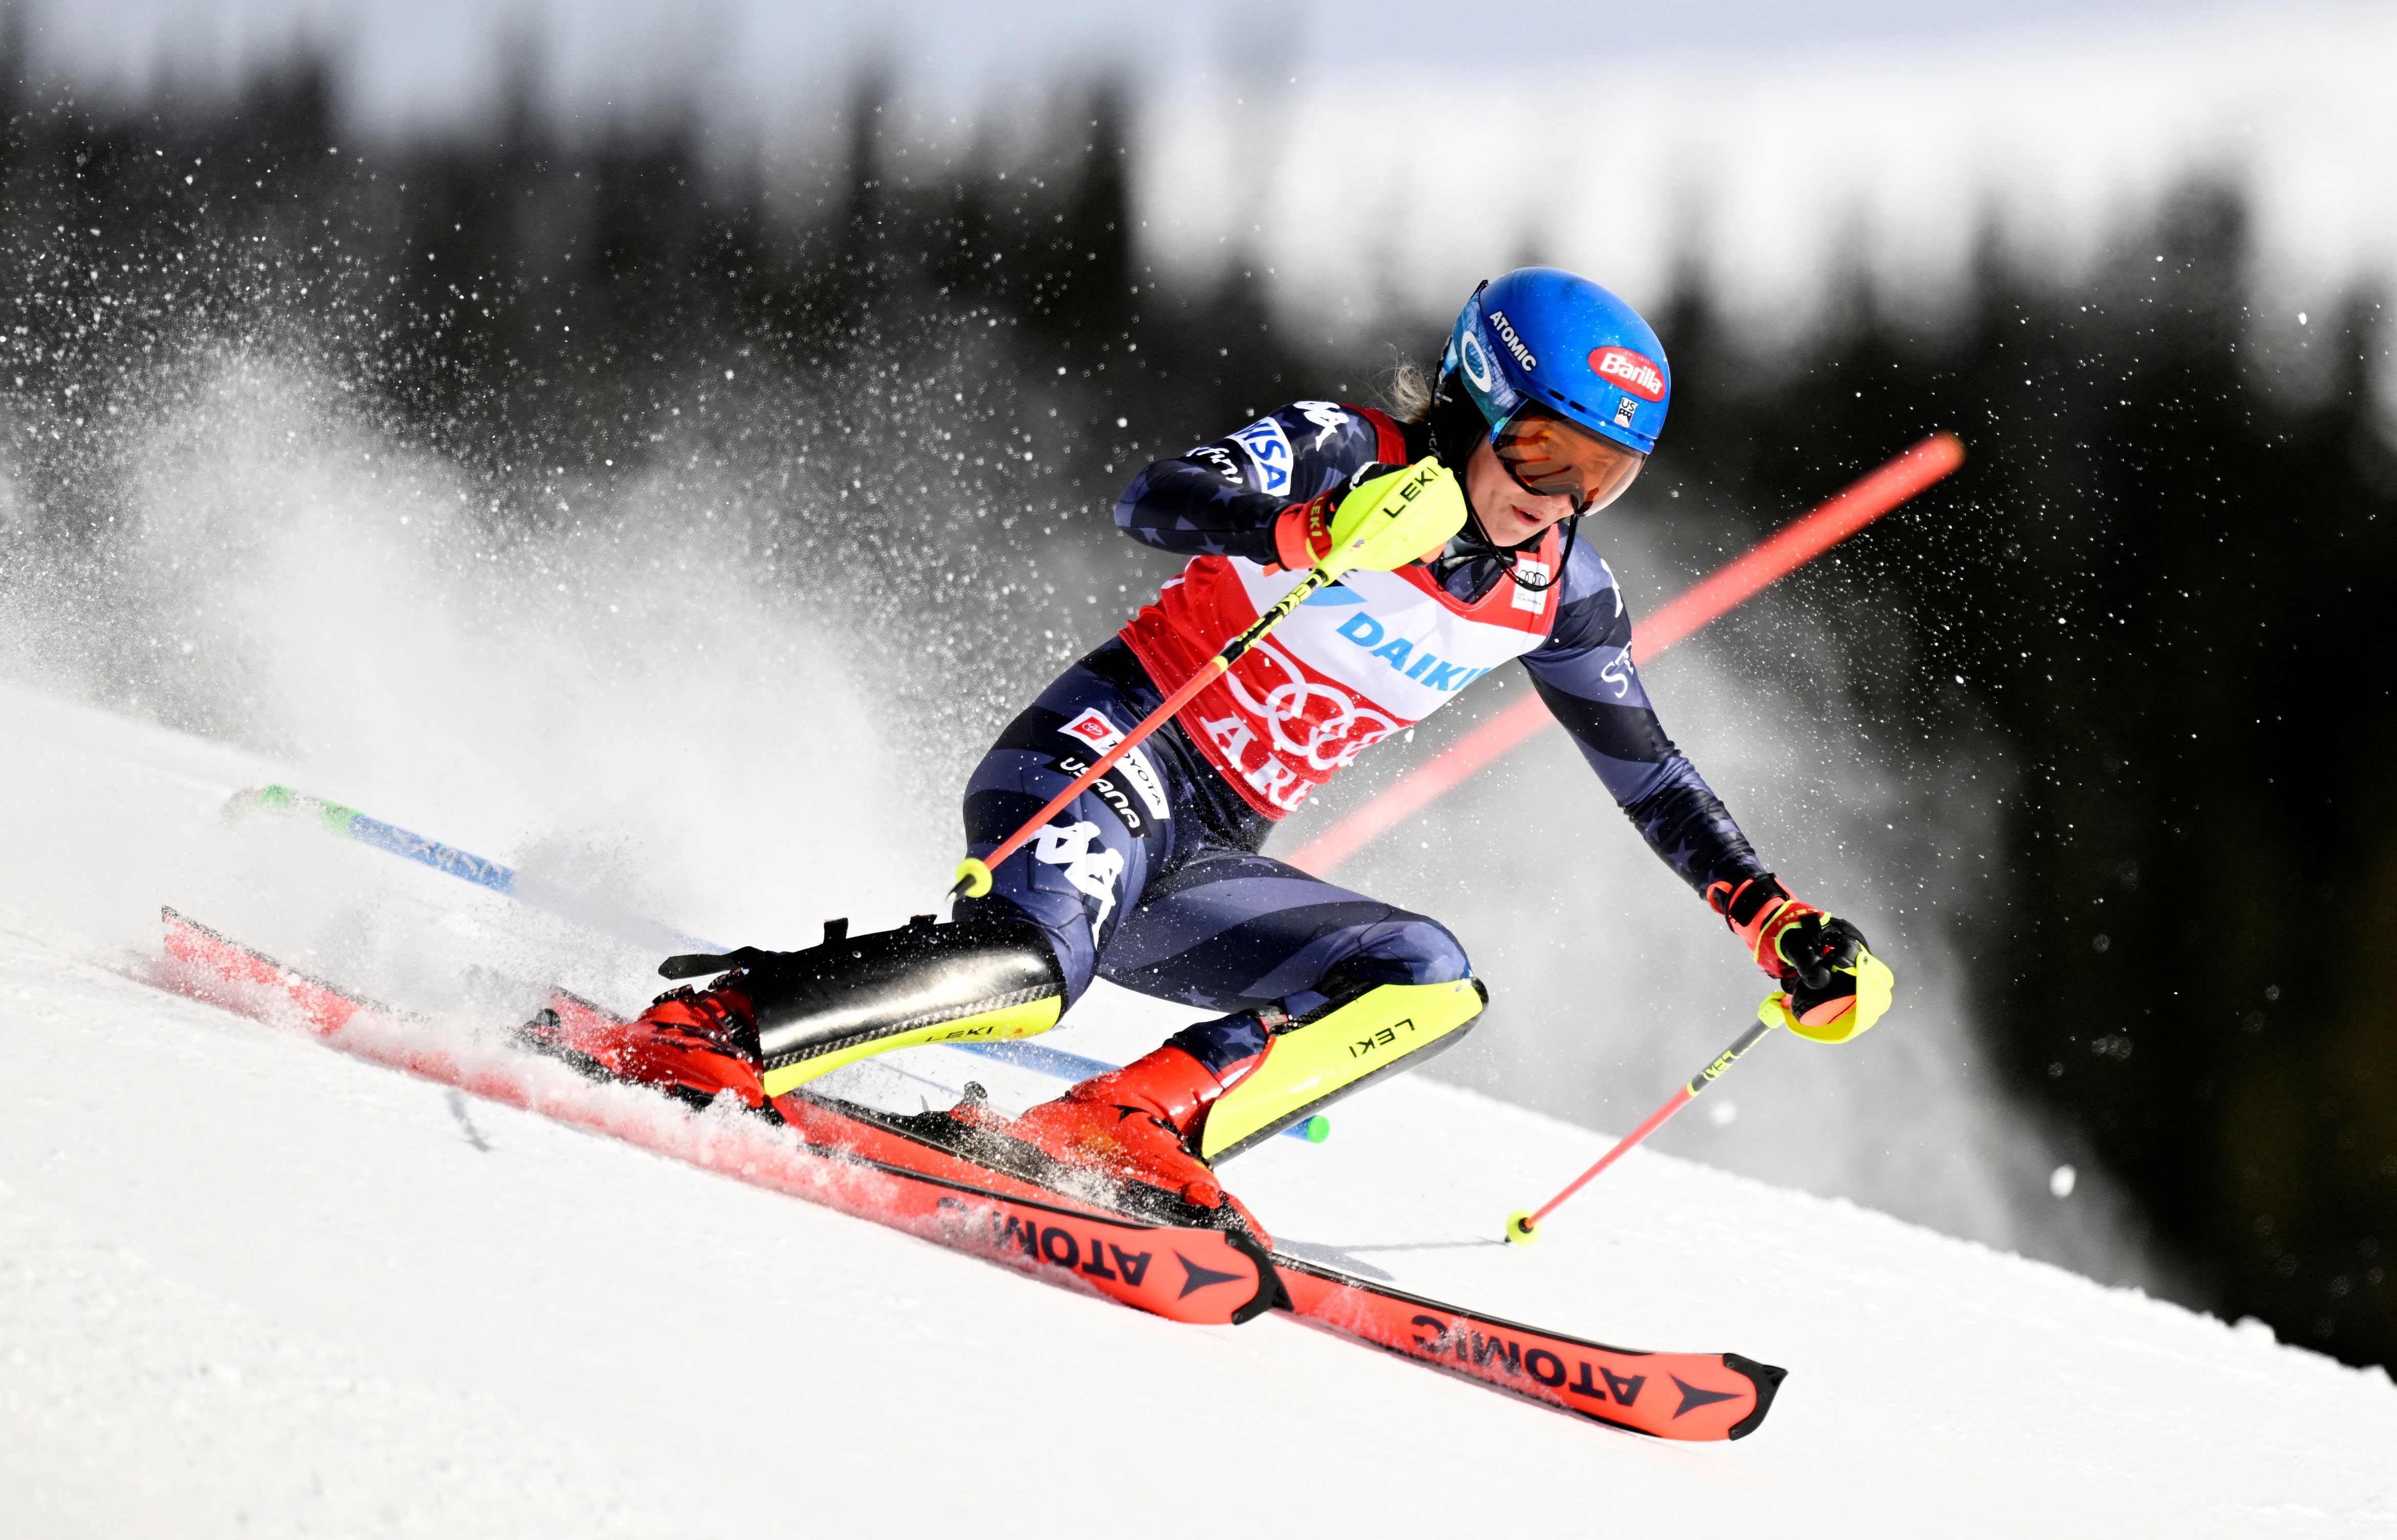 FIS Alpine Ski World Cup - Are, Sweden - March 11, 2023 Mikaela Shiffrin of the U.S. in action Pontus Lundahl/TT News Agency via REUTERS.